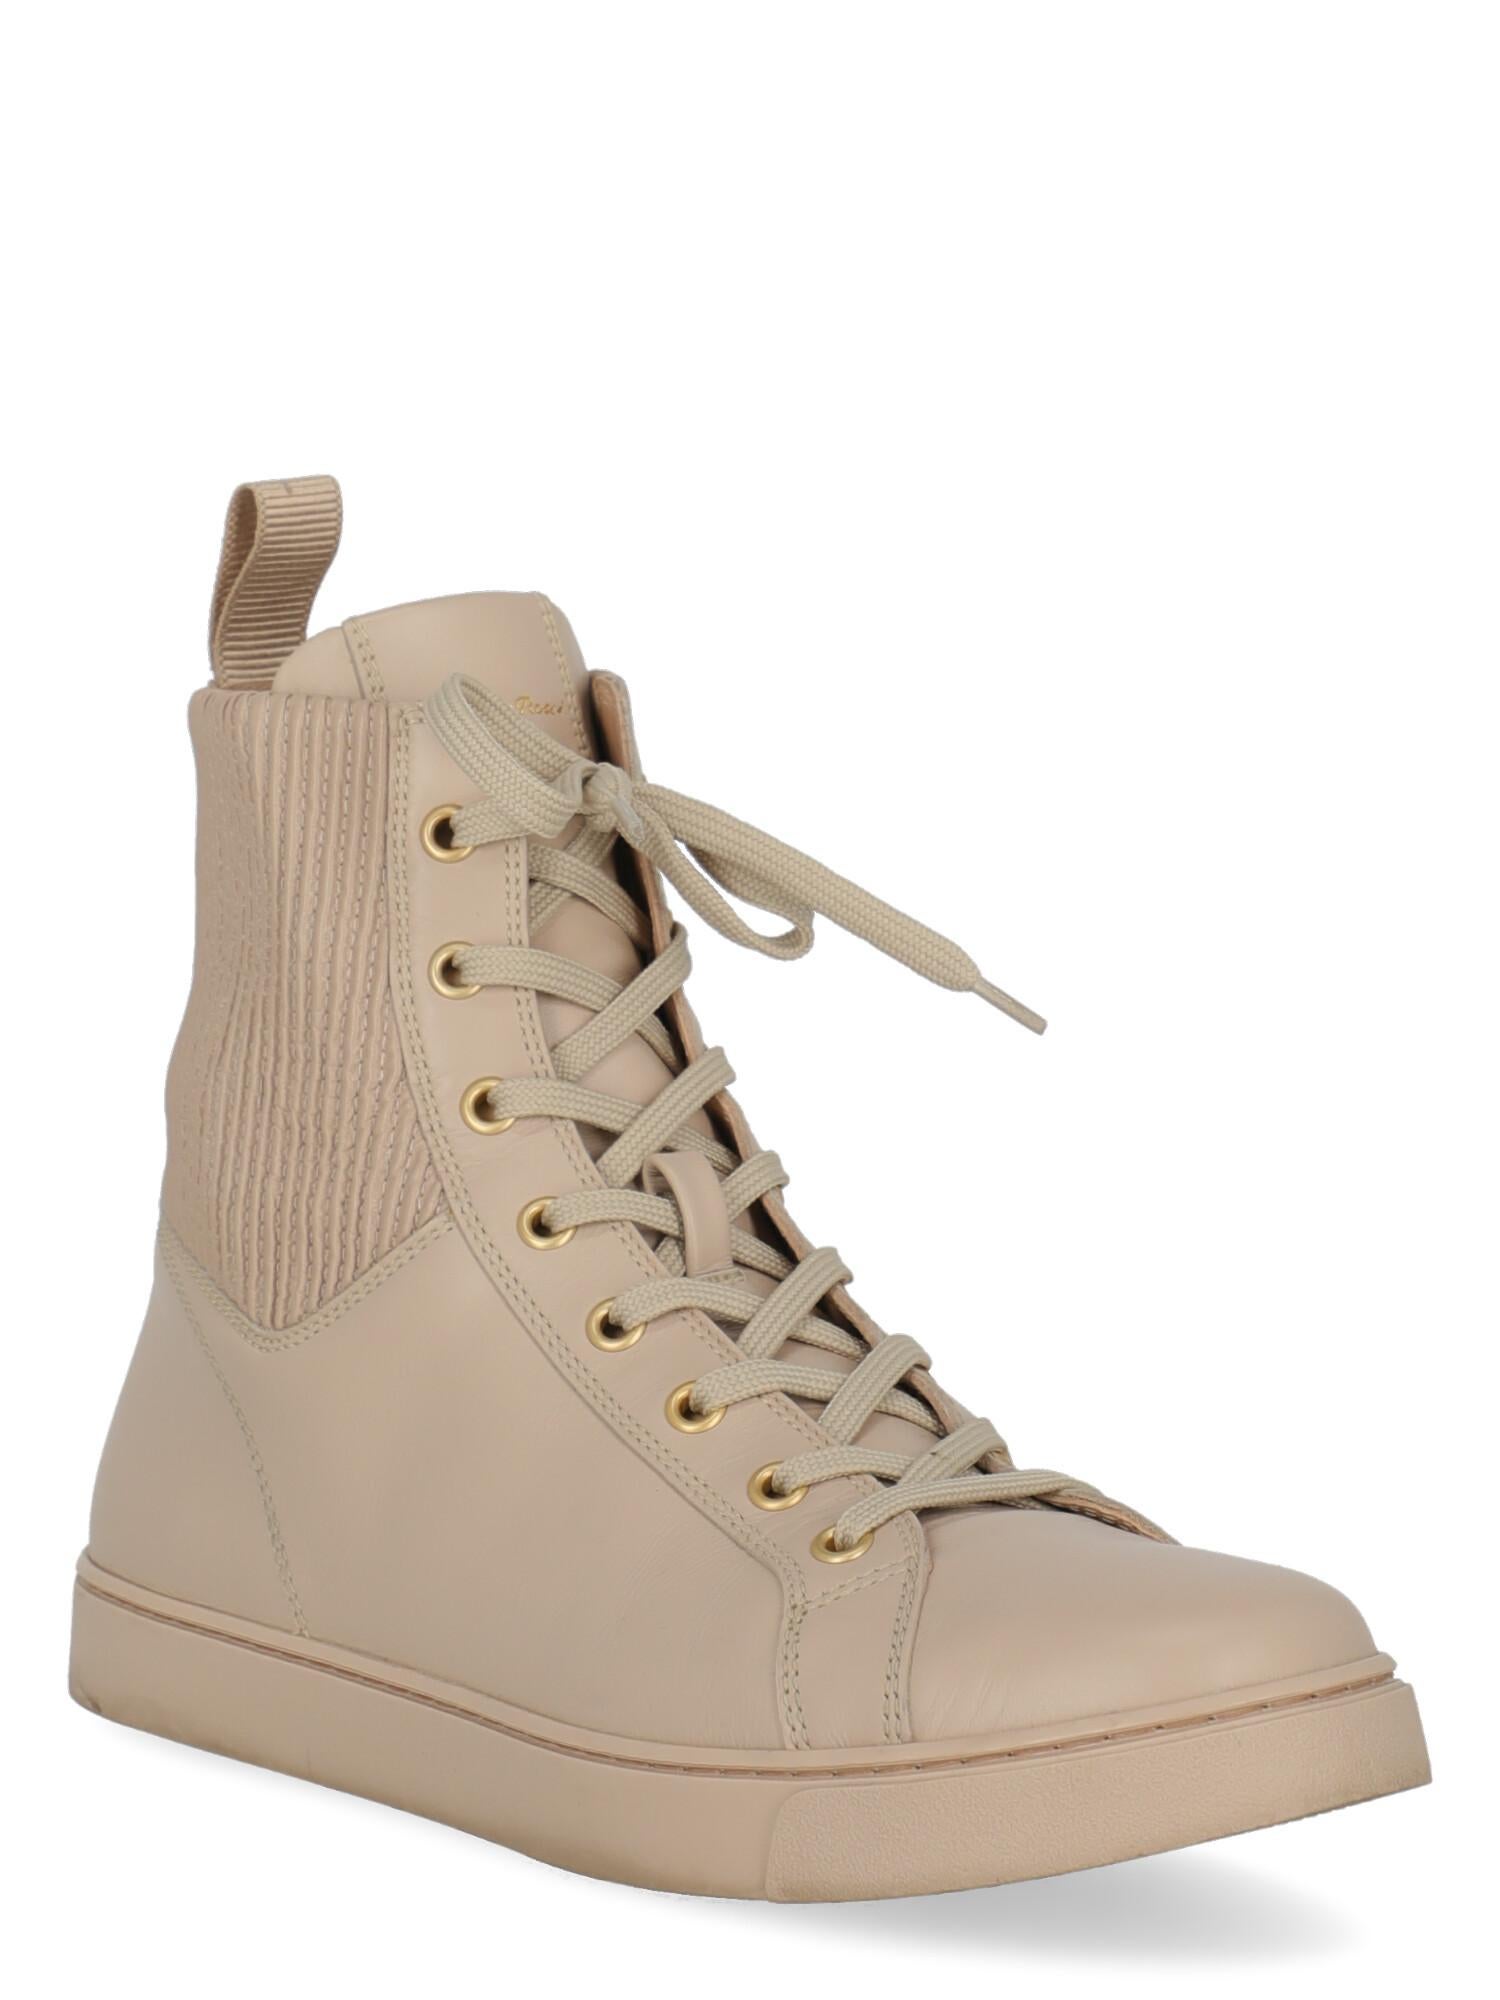 Product Description: Sneaker, leather, solid color, lace-up, gold-tone hardware, round toe, branded insole

Includes:
Box
Product care

Product Condition: Very Good
Sole: visible signs of use. Upper: negligible scratch, slightly visible stains,